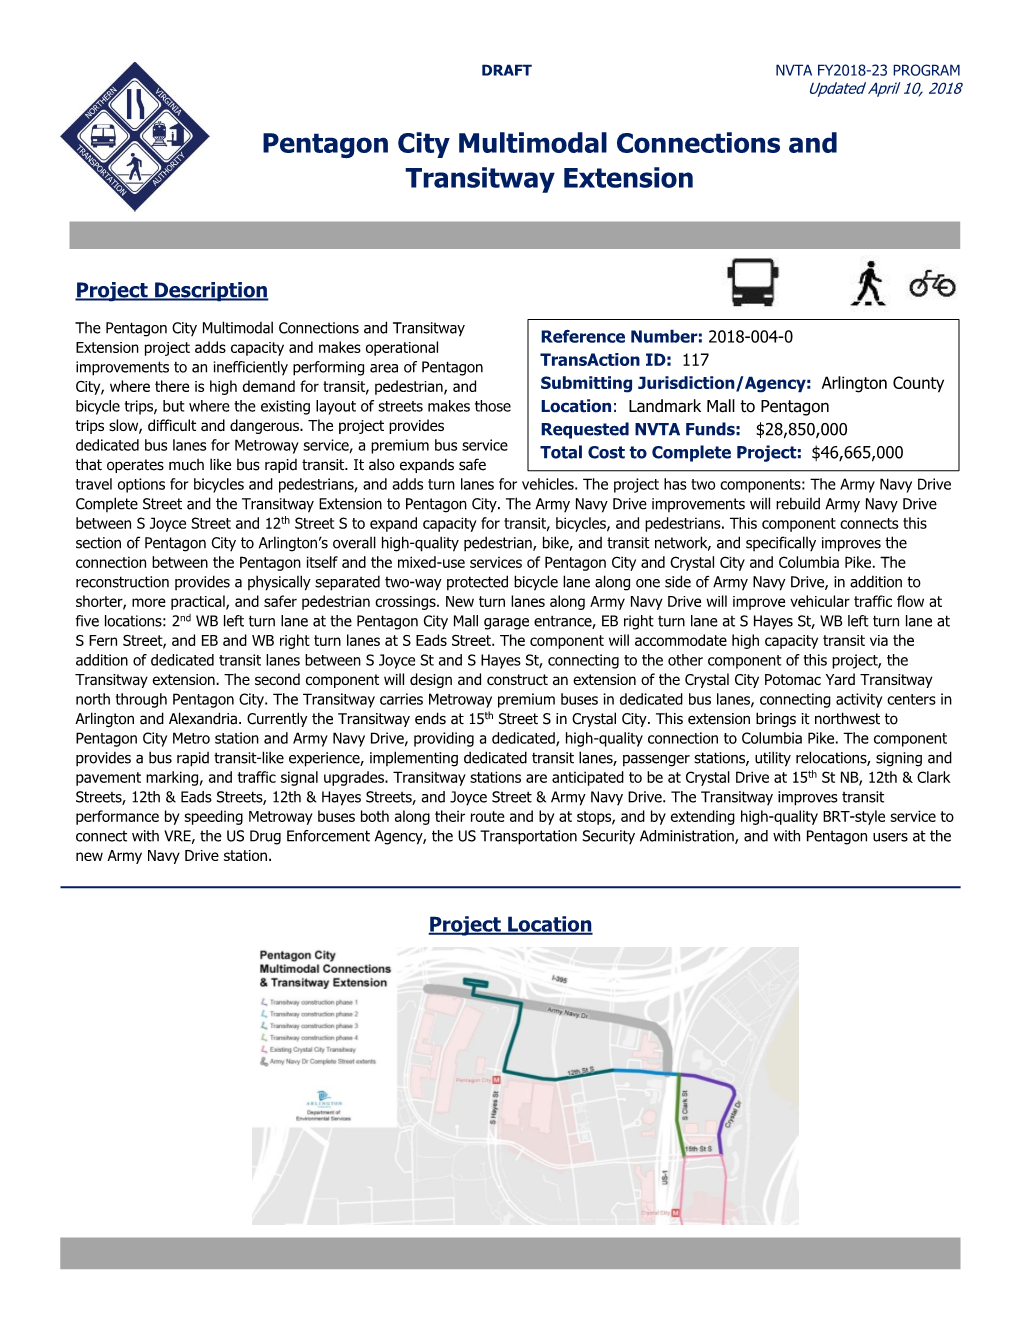 Pentagon City Multimodal Connections and Transitway Extension